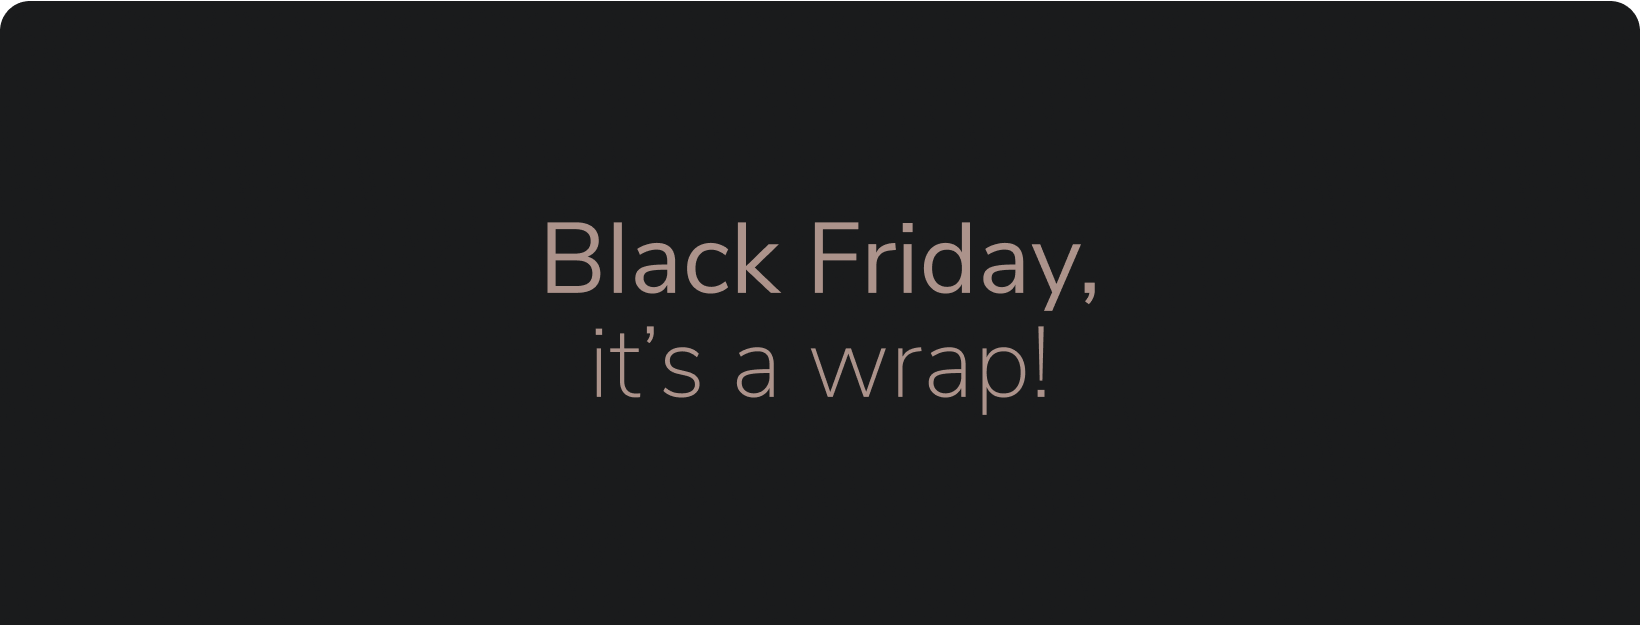 Counting the Days to Black Friday?